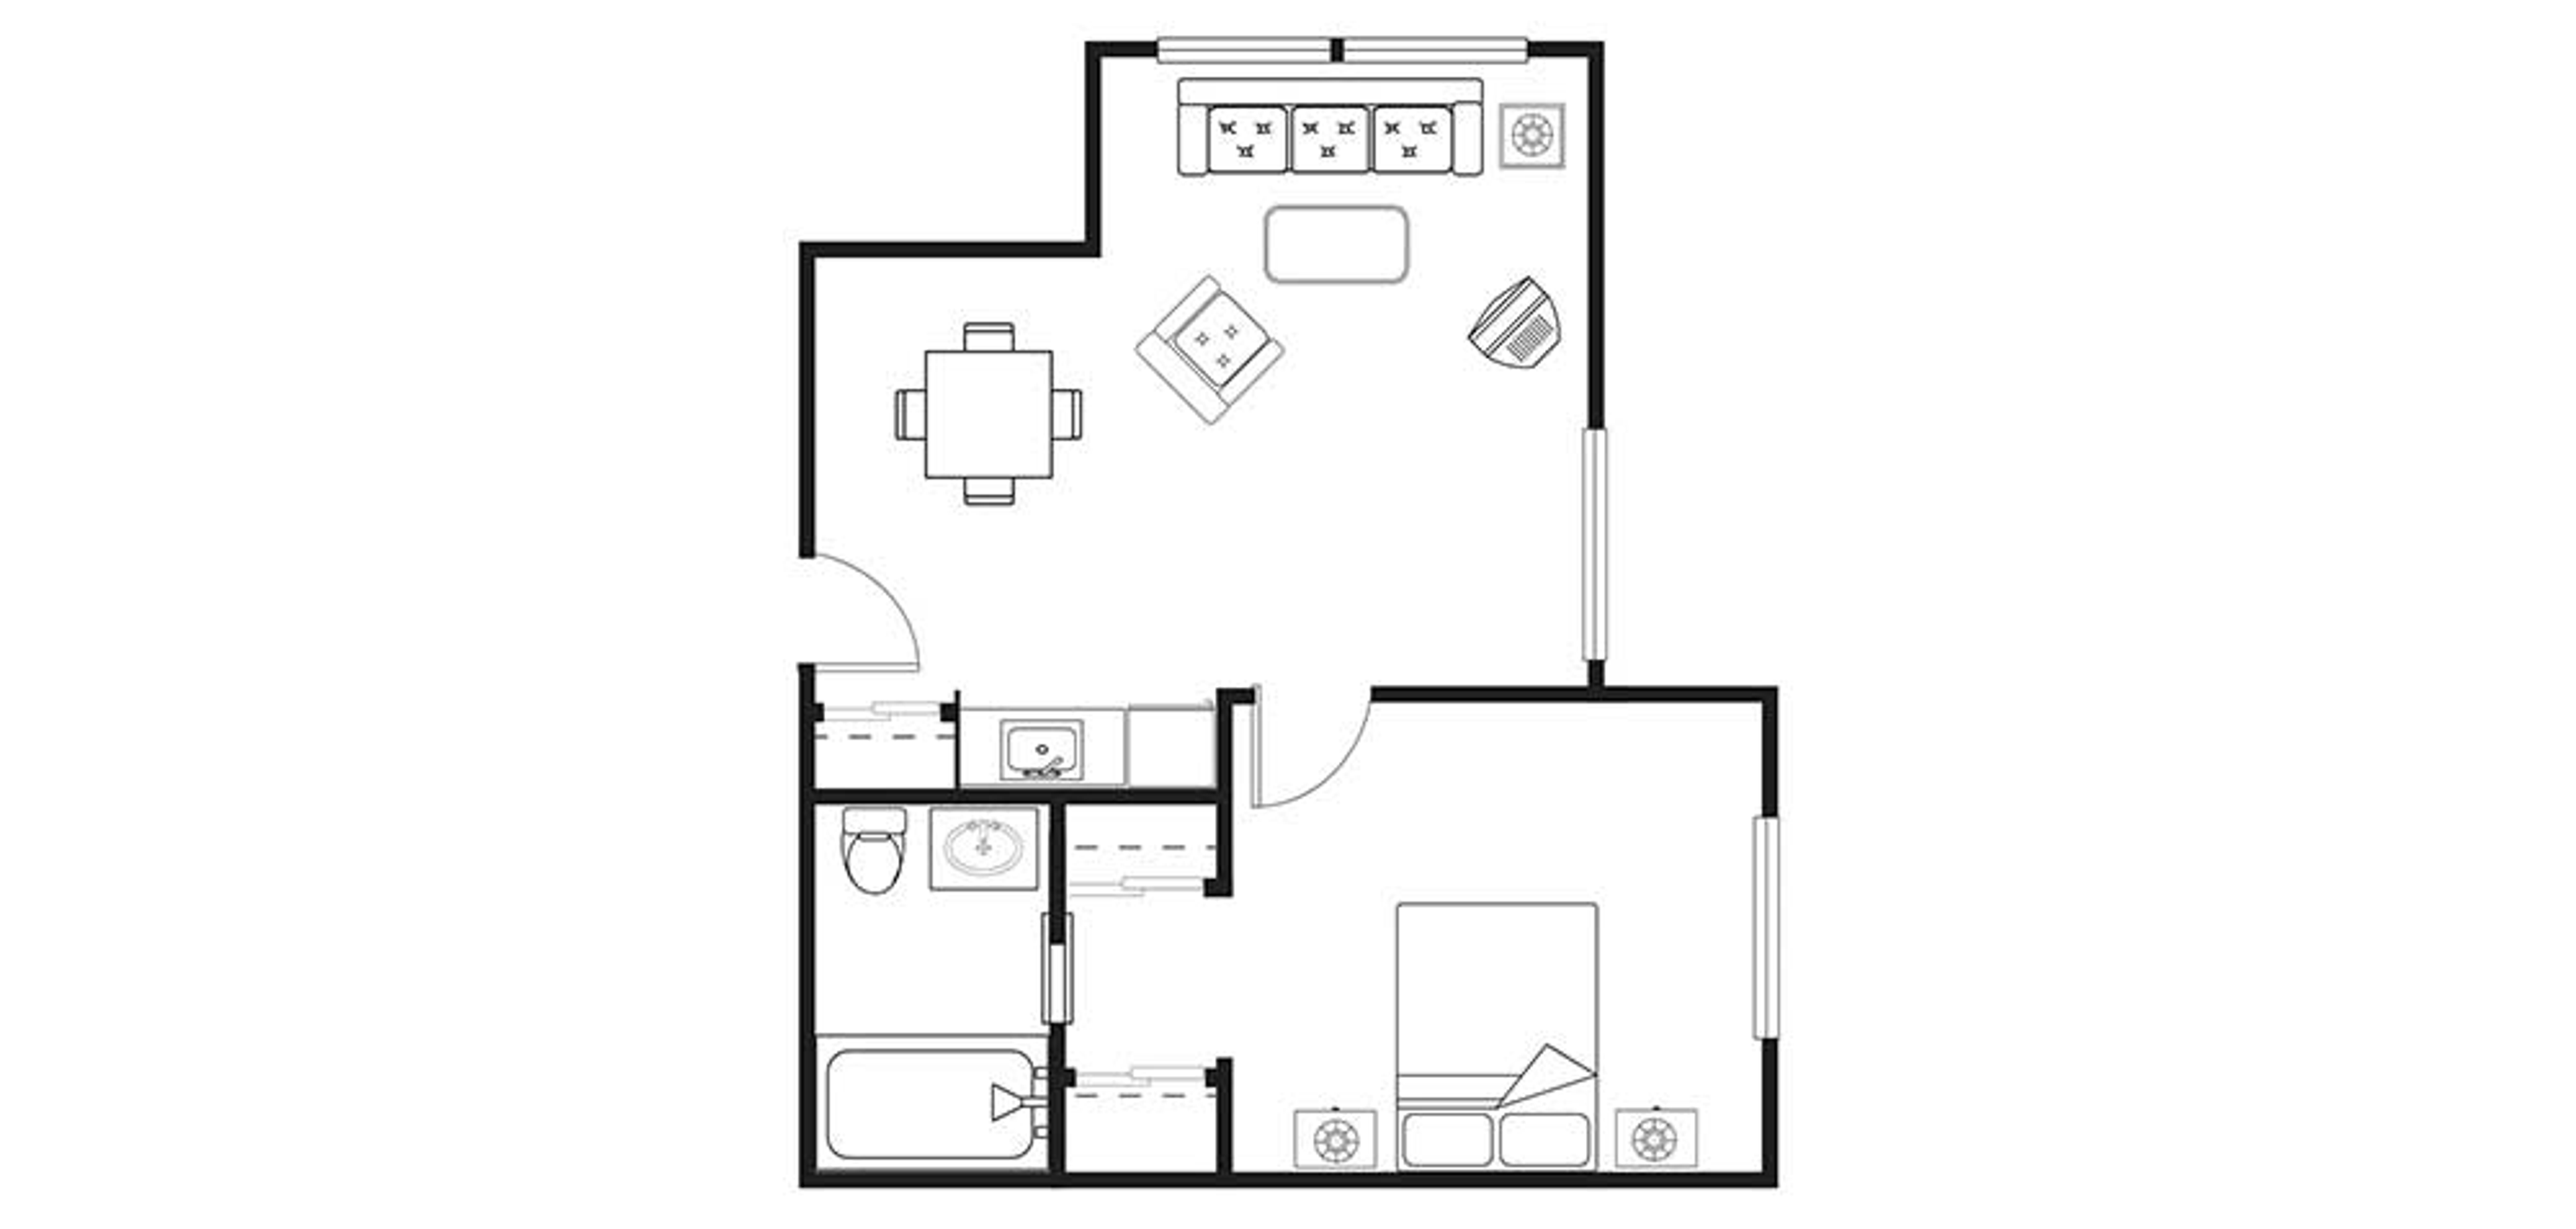 Floorplan - Redwood Heights - B2 One Bedroom 613 sq. ft. Assisted Living